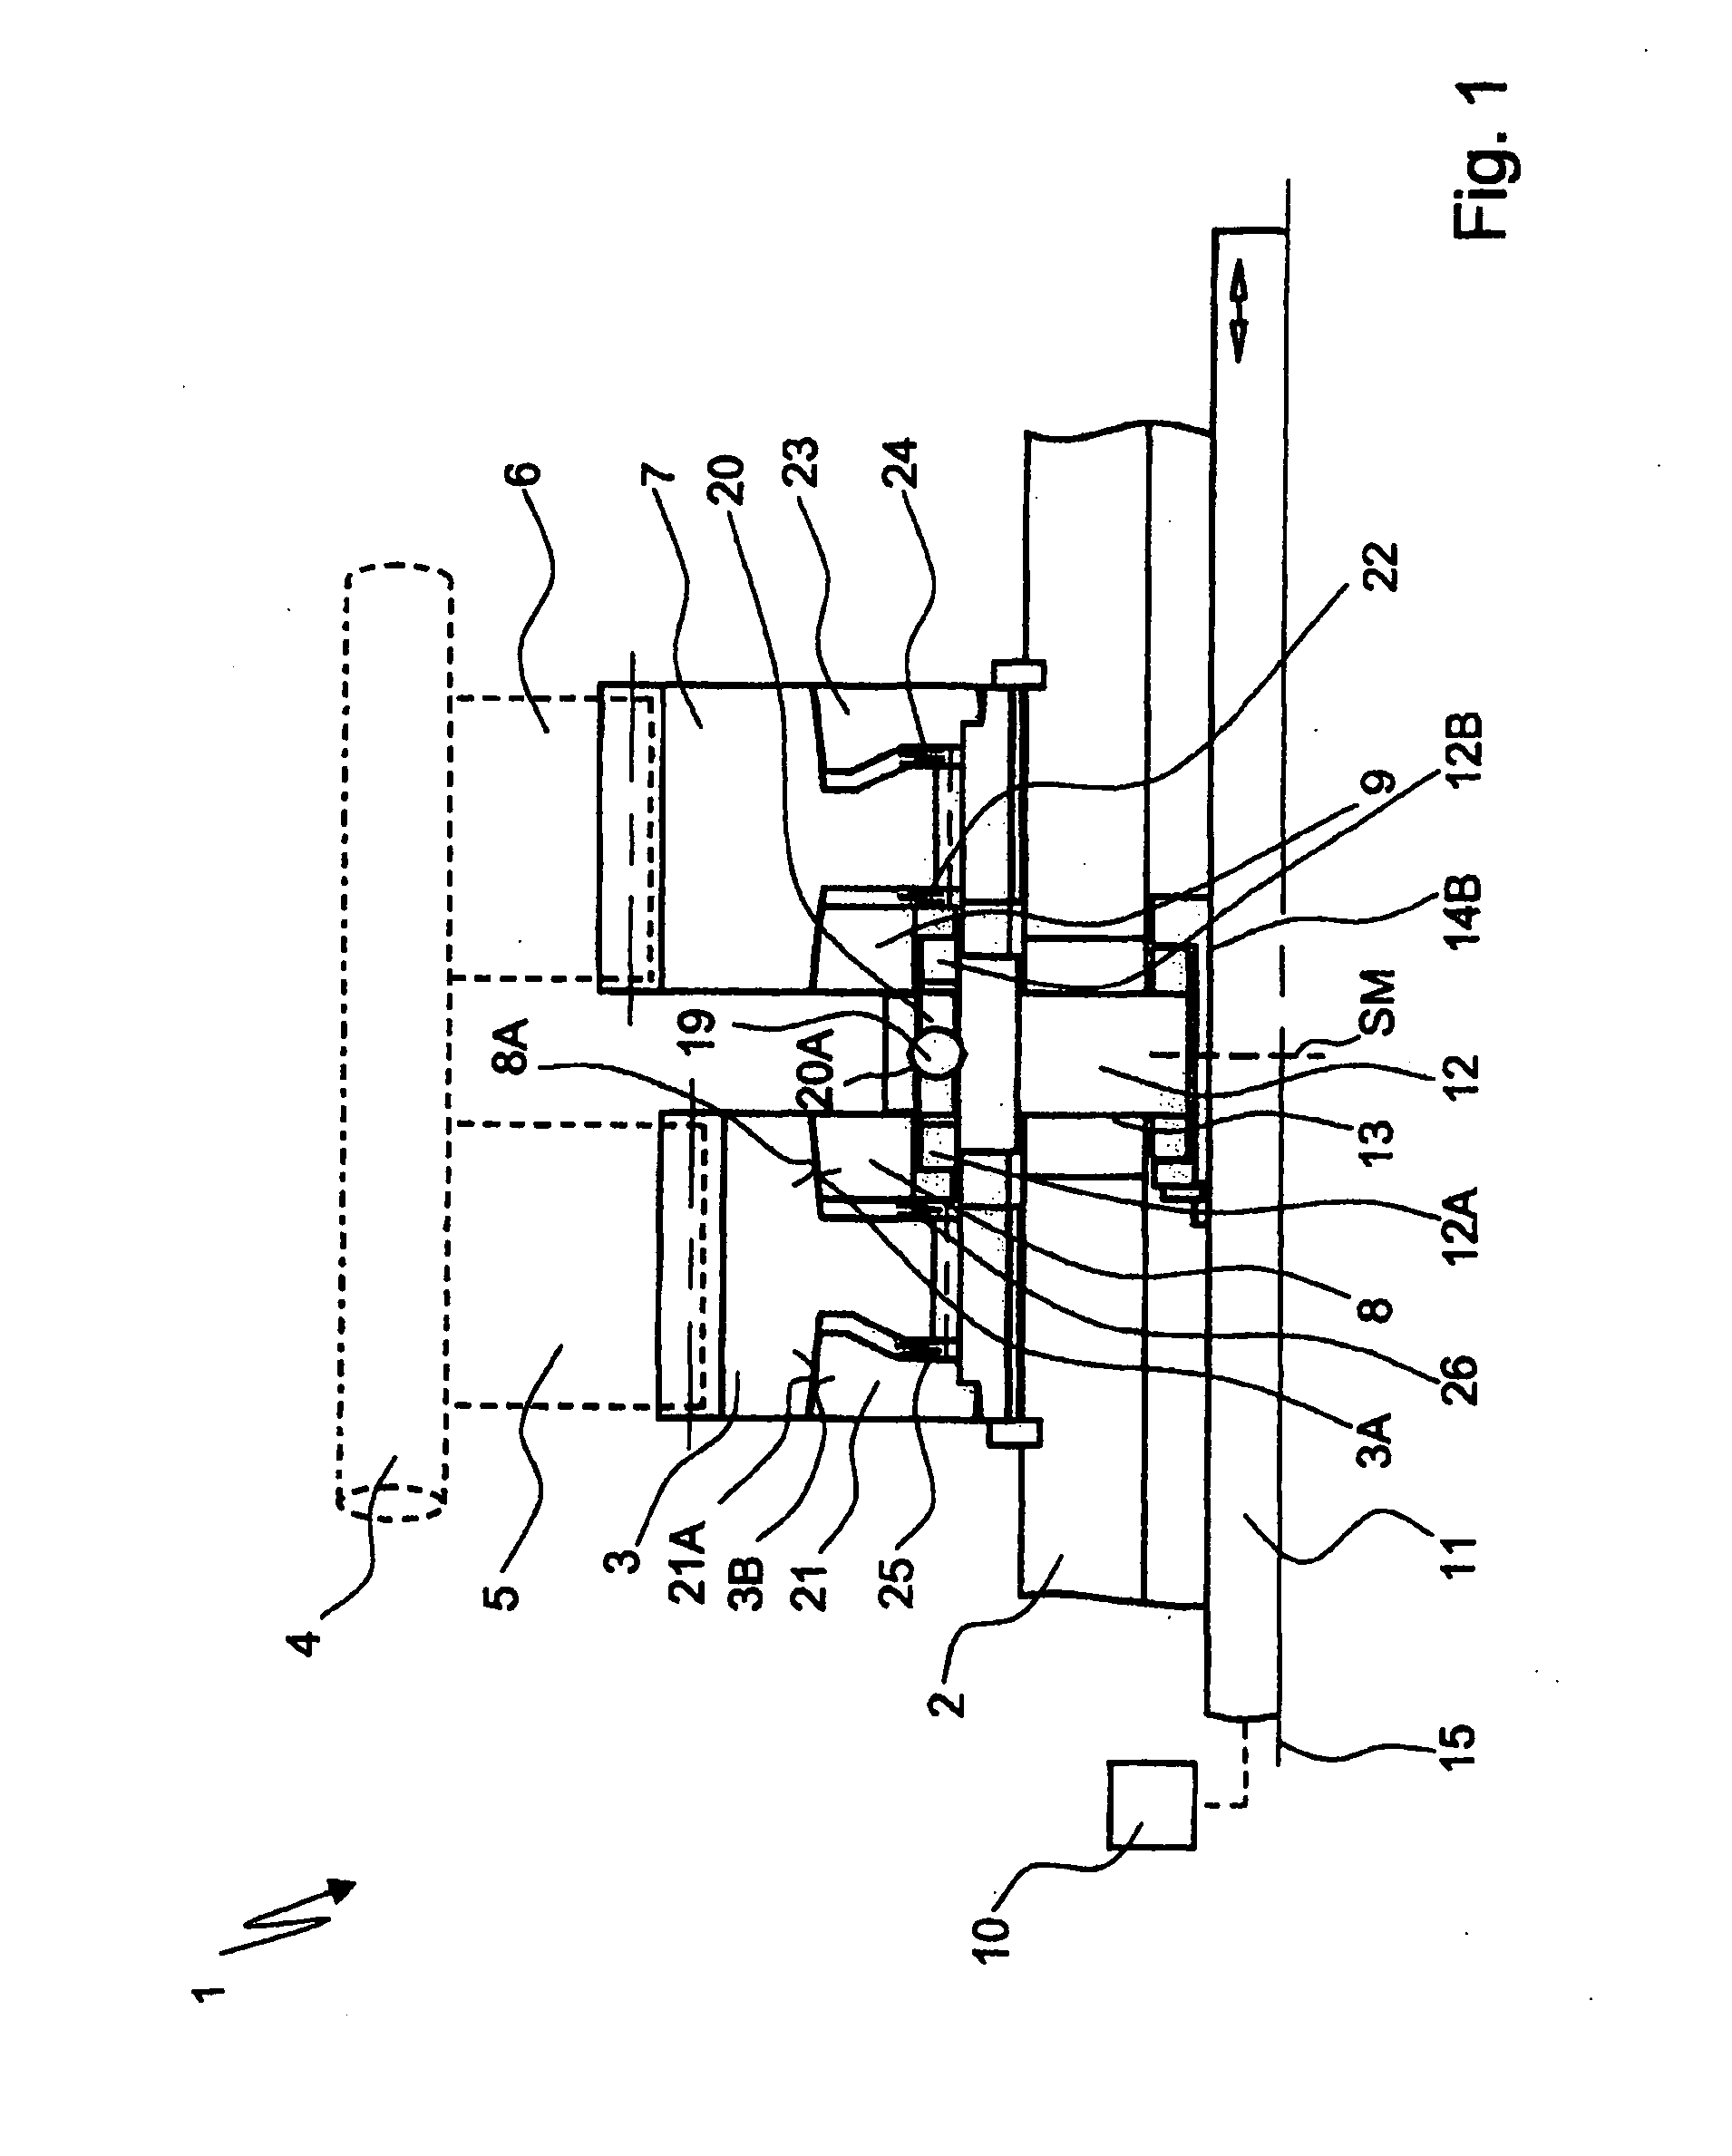 Device of a rotationally fixedly connecting a shaft to a component which is rotatably mounted on the shaft